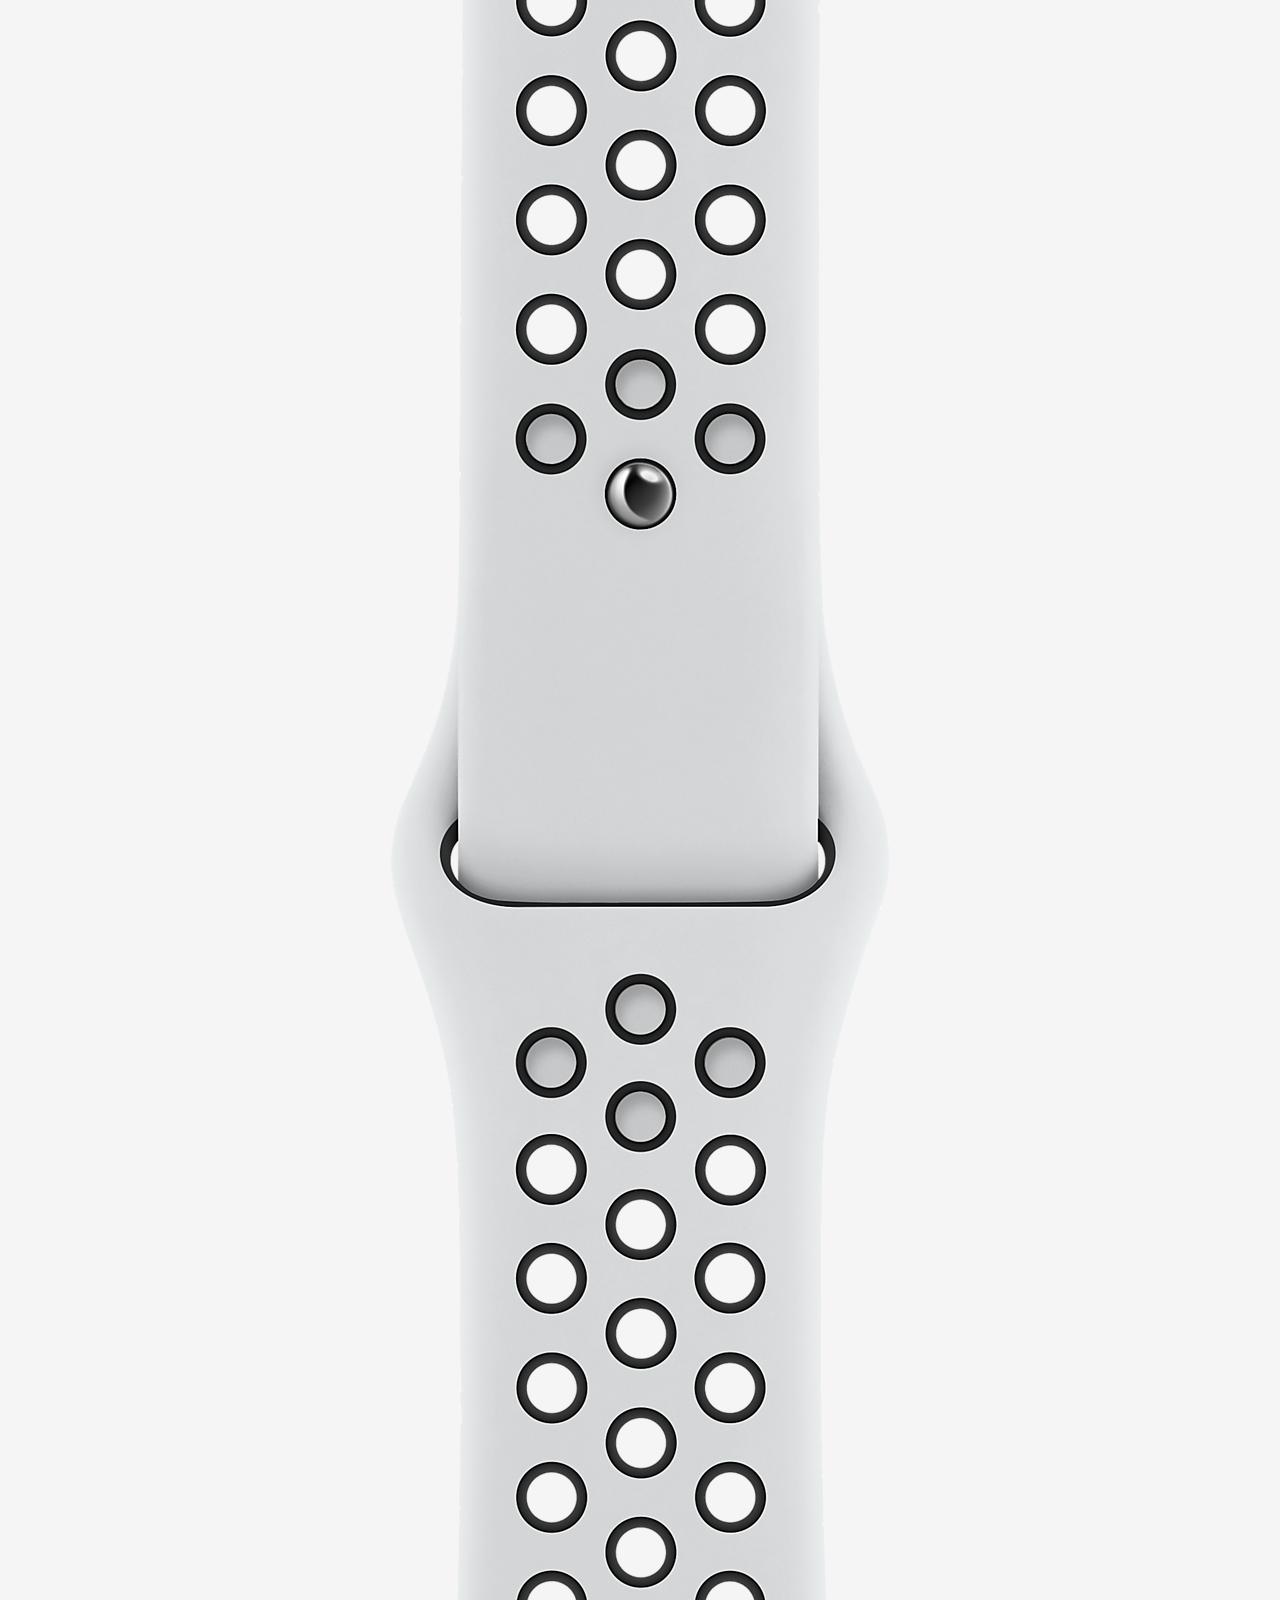 apple watch series 7 (gps + cellular) with nike sport band